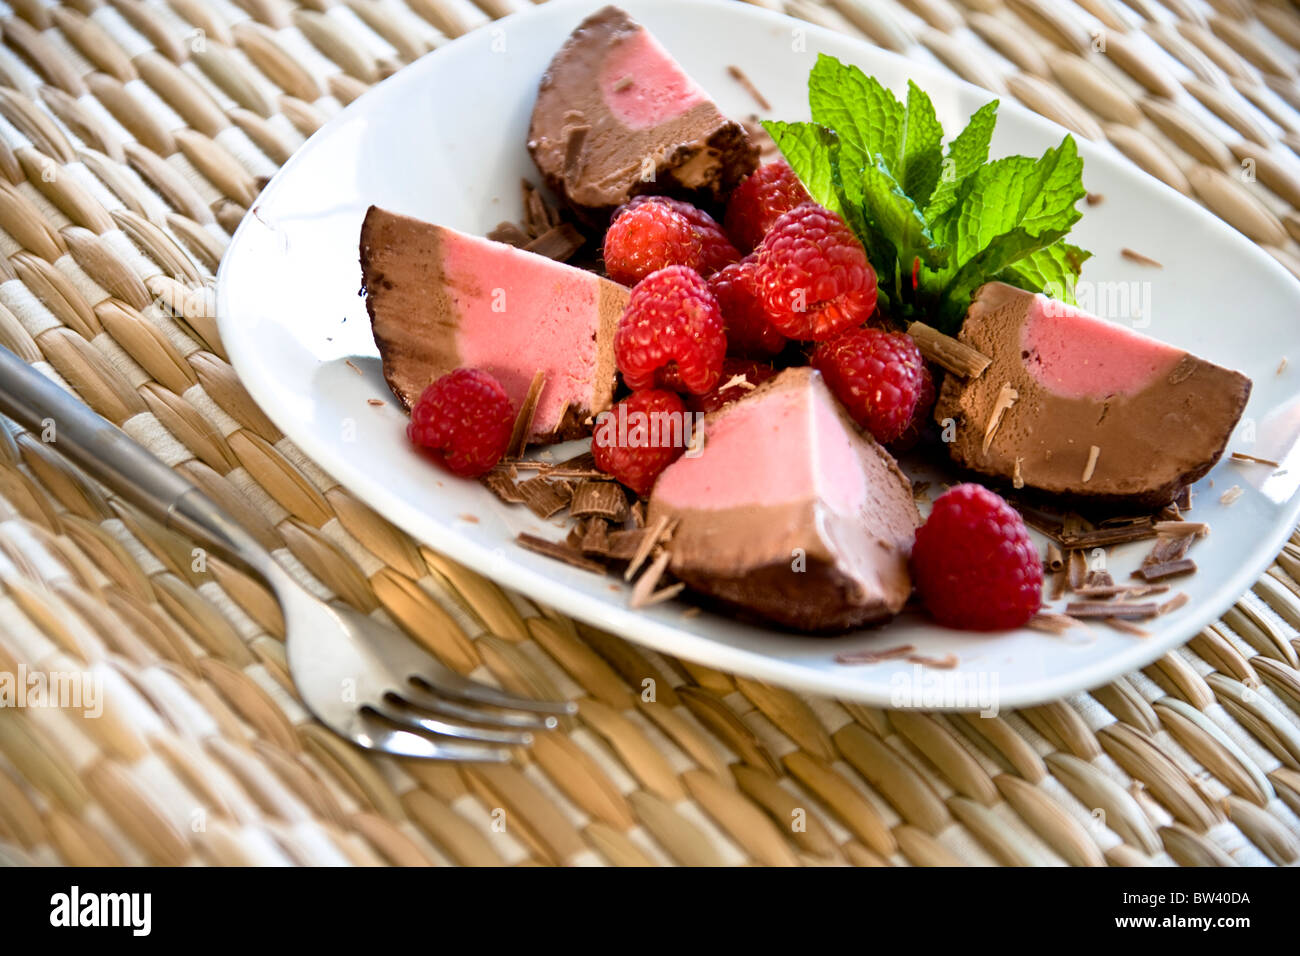 Chocolate Raspberry dessert, white plate and woven background Stock Photo